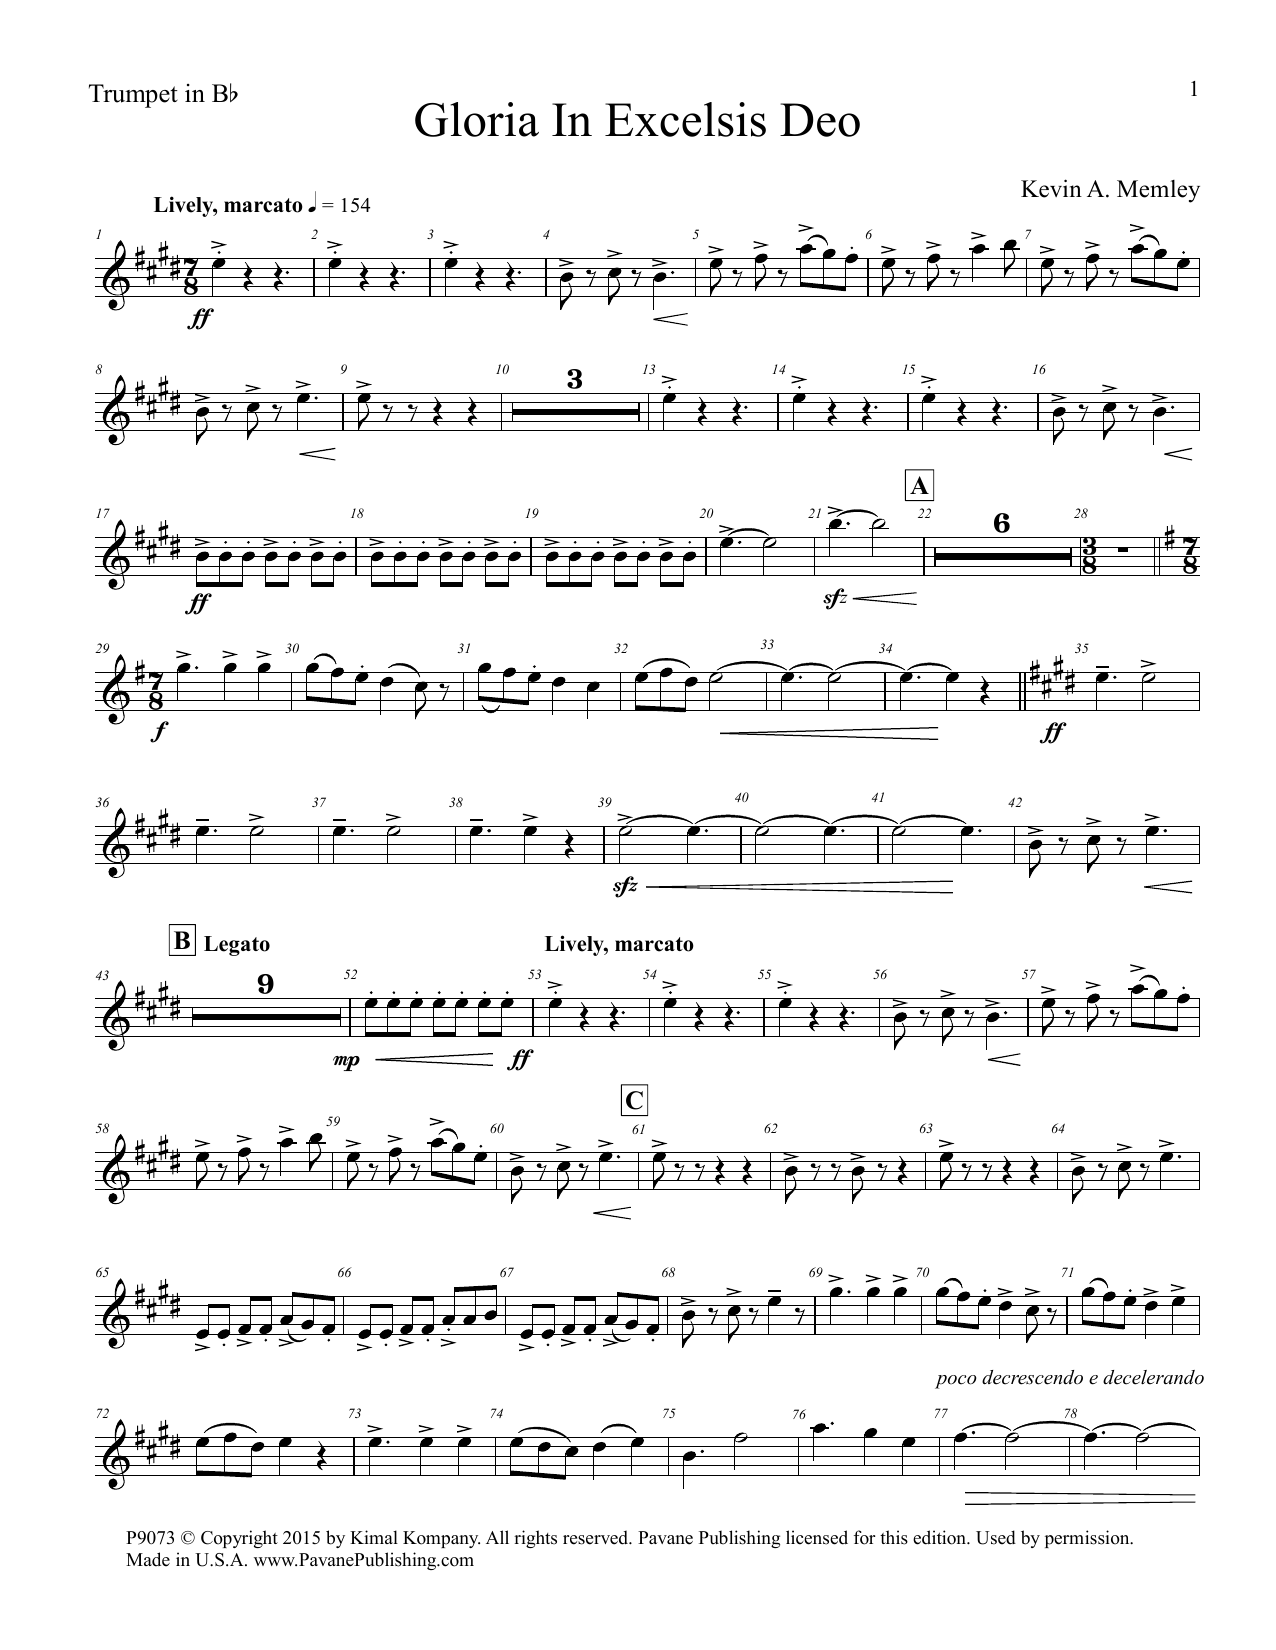 Download Kevin A. Memley Gloria in Excelsis Deo - Trumpet Sheet Music